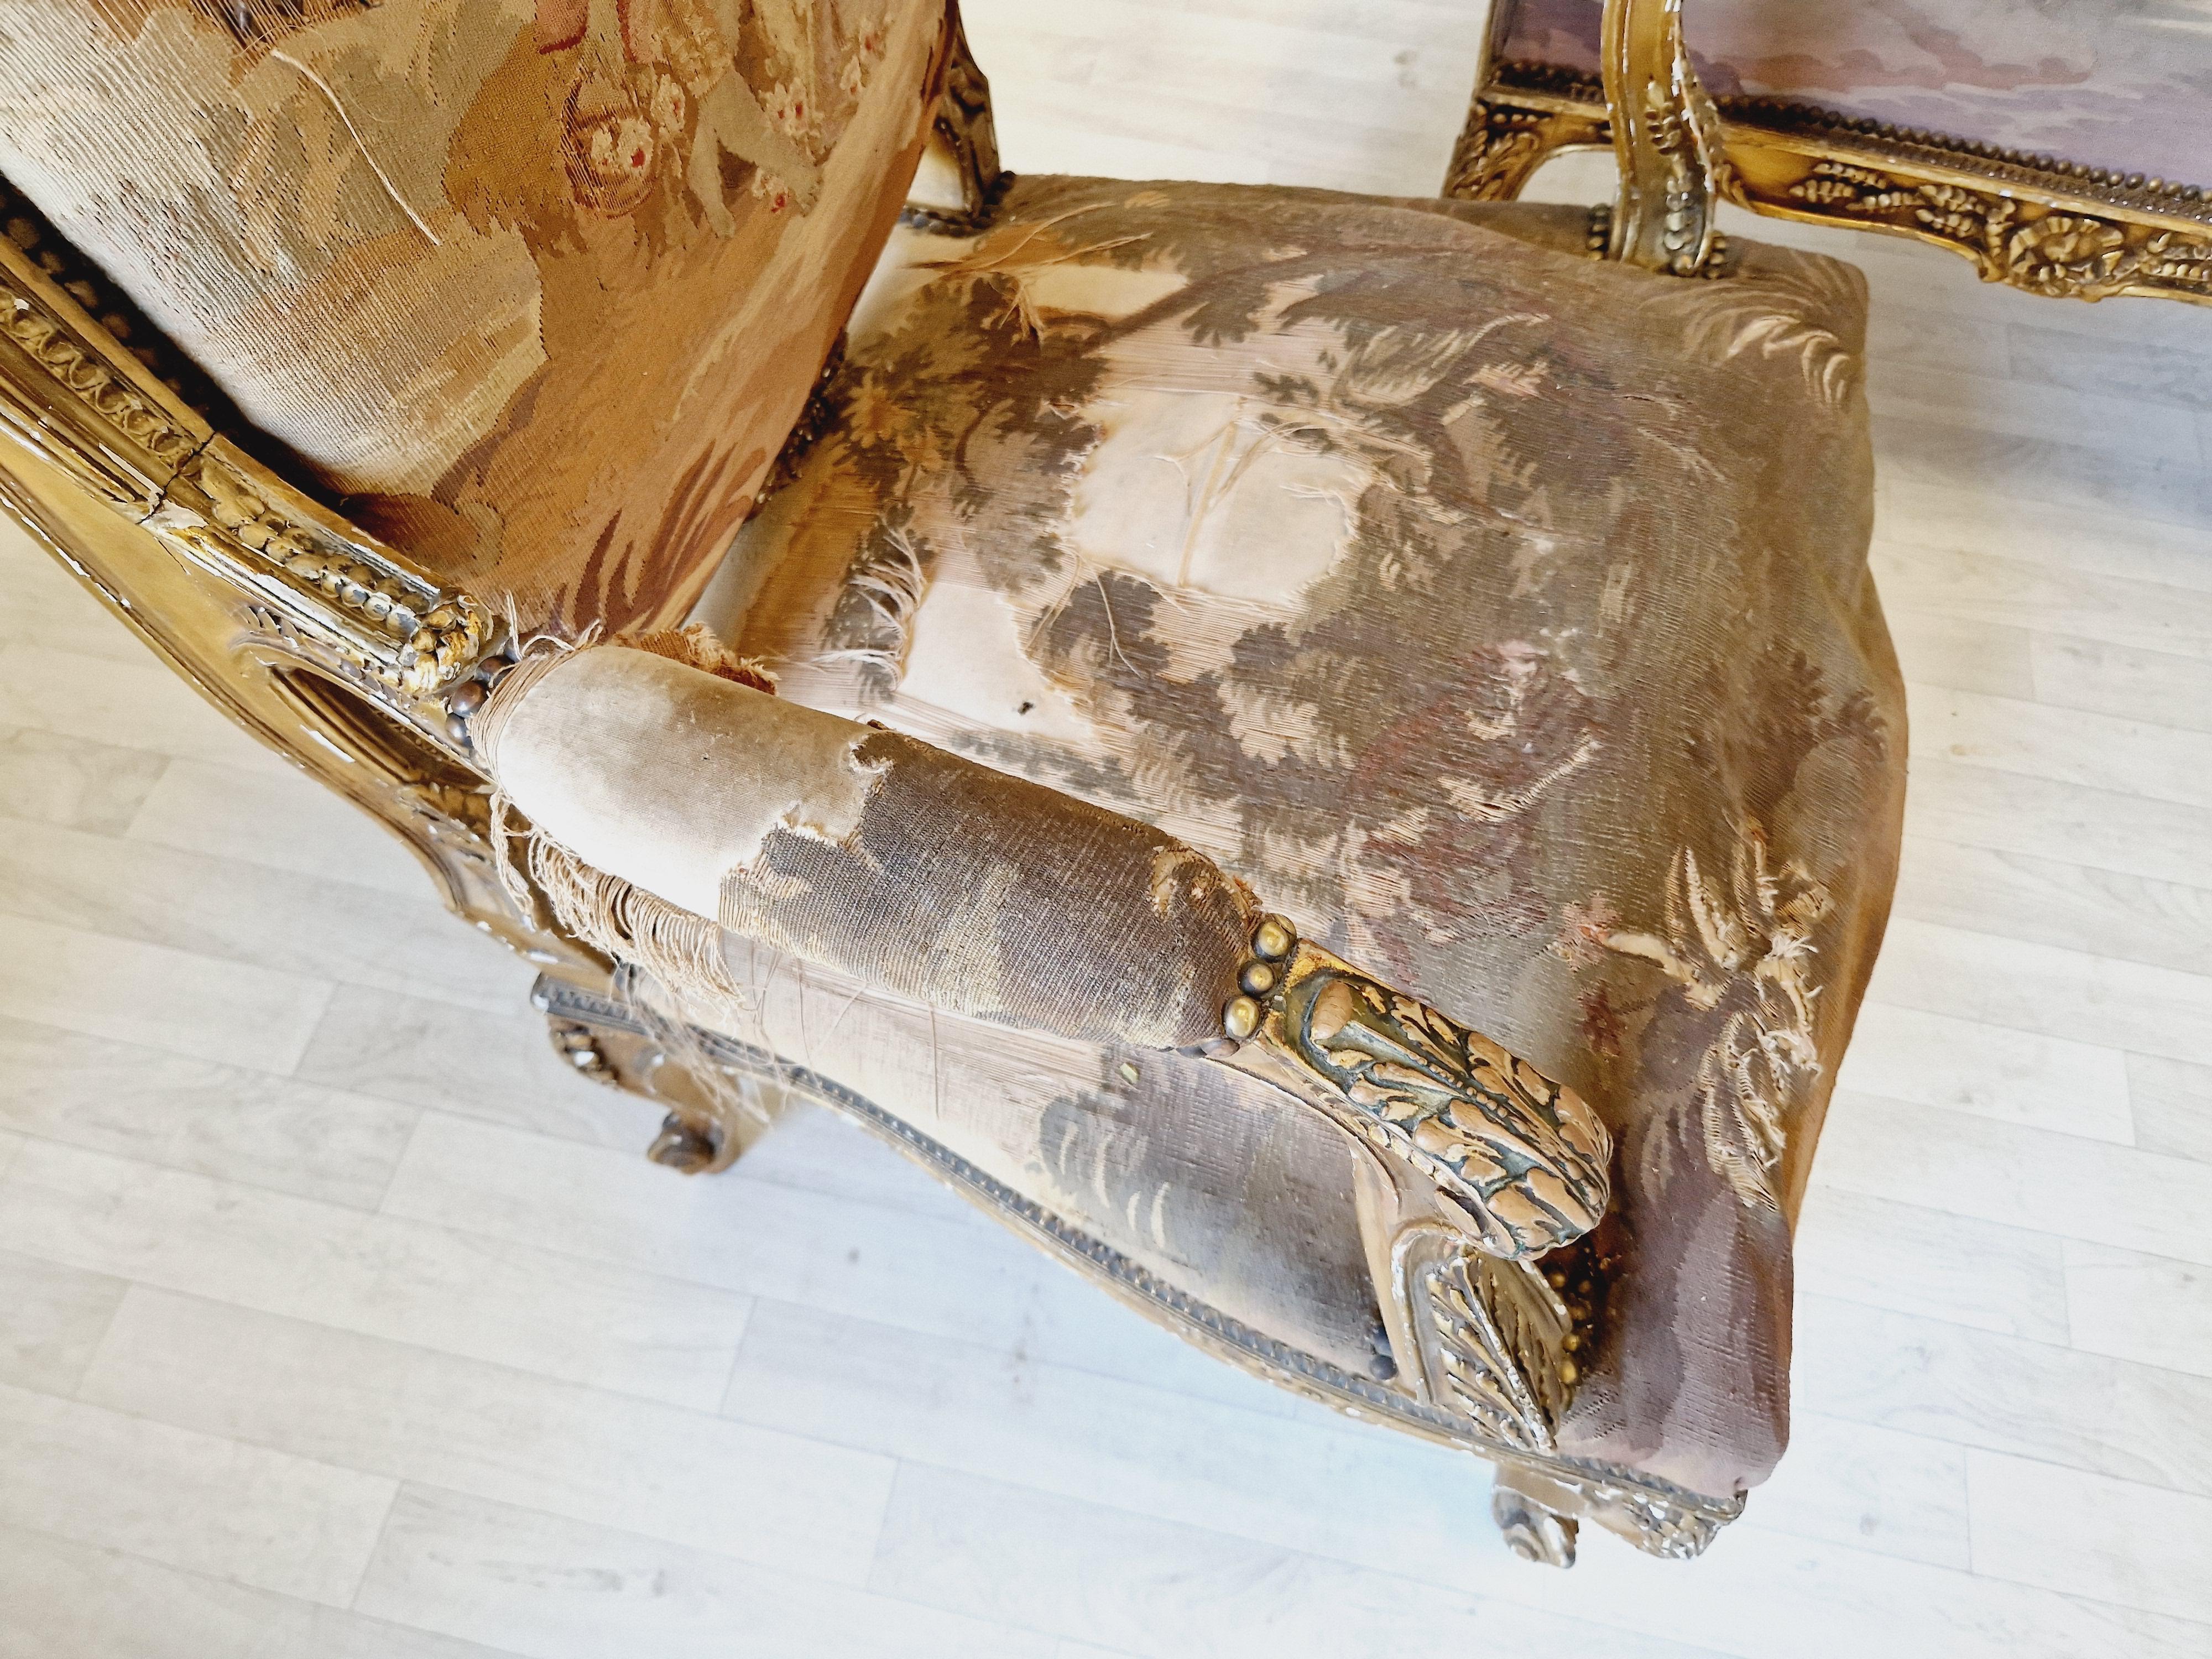 
We are delighted to offer for sale, this exquisite French Aubusson salon set is a stunning piece of antique furniture that will add elegance and charm to any room. The set includes a Louis XV giltwood sofa and a pair of armchairs, upholstered with